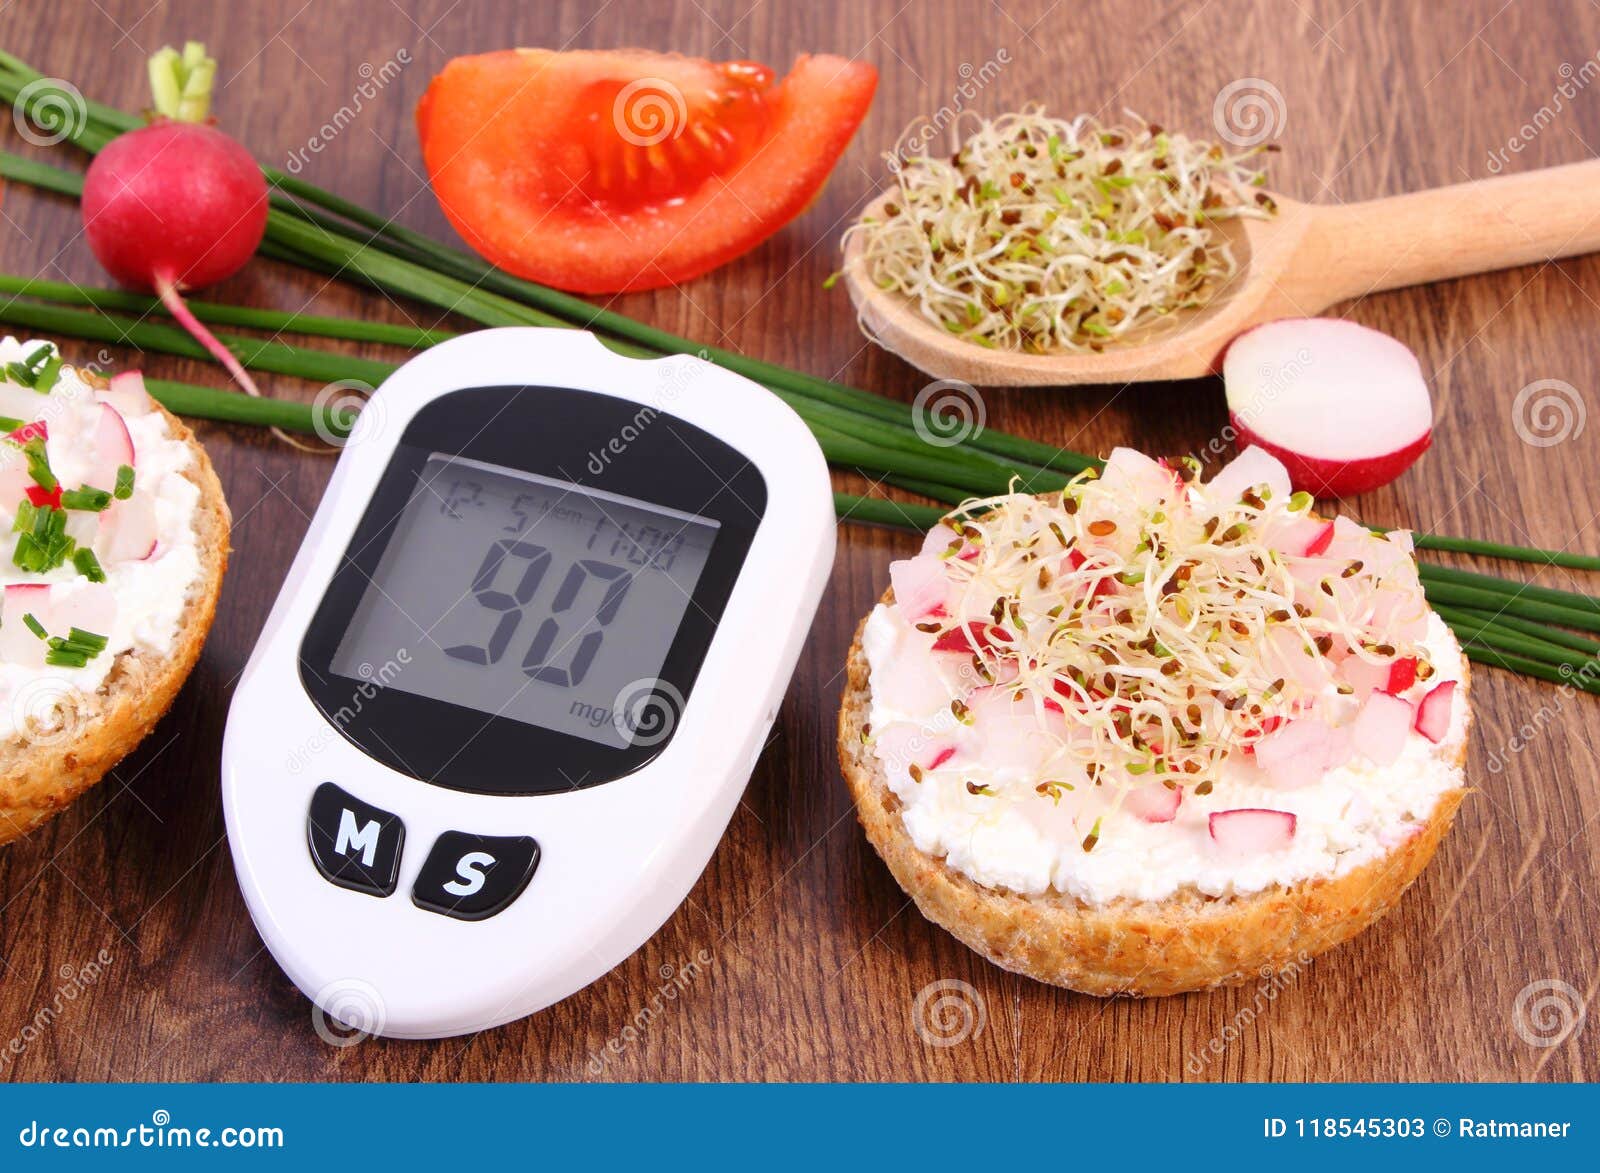 Glucometer For Checking Sugar Level And Freshly Sandwich With